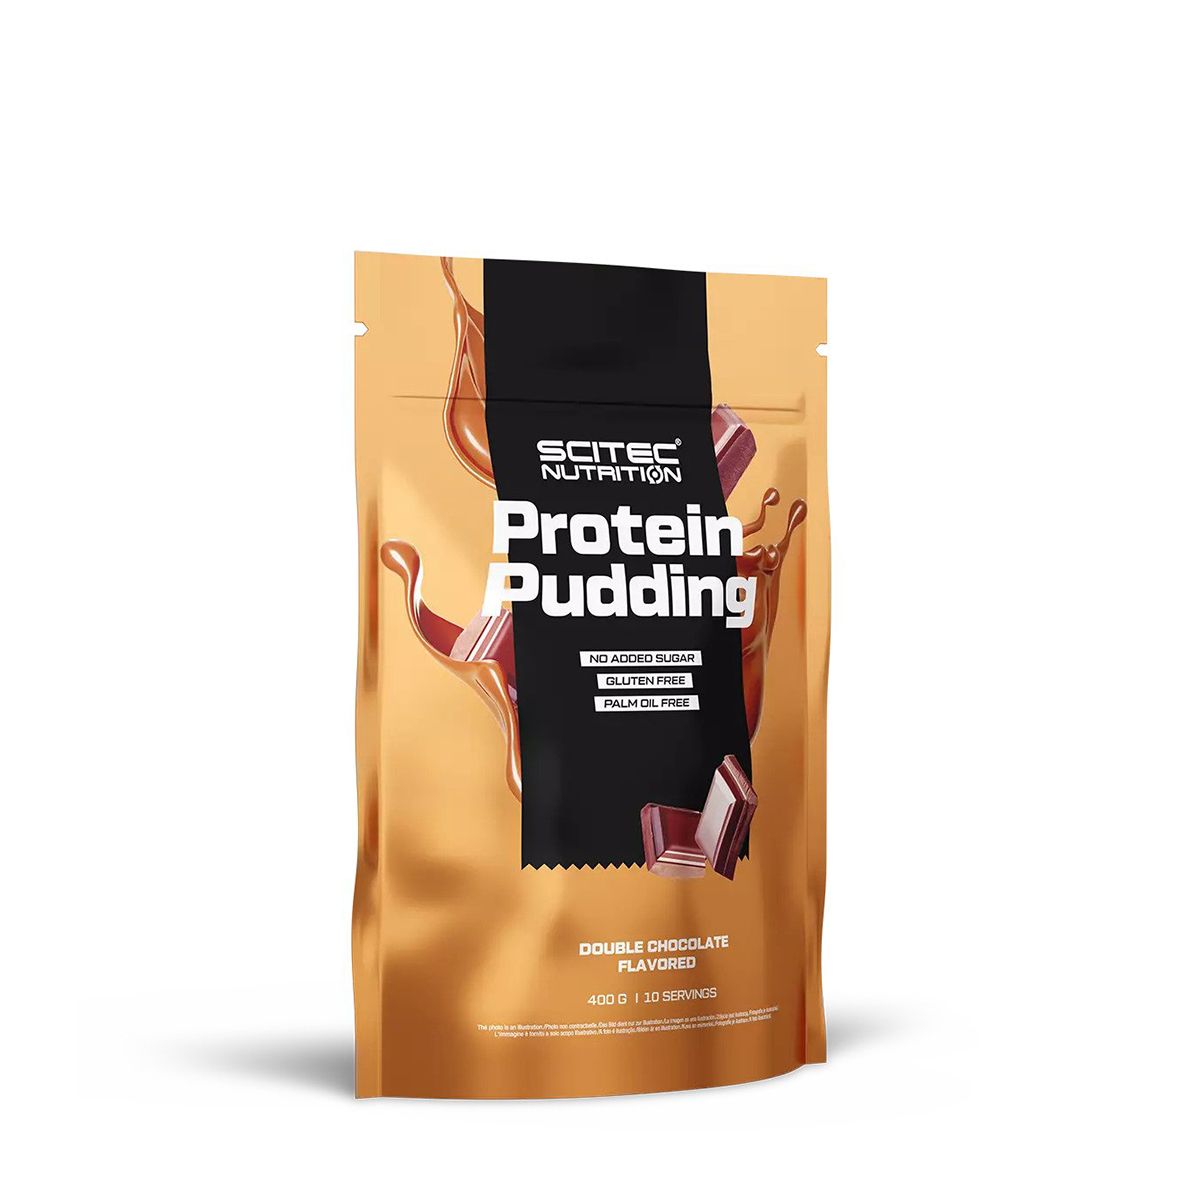 SCITEC NUTRITION - PROTEIN PUDDING - 400 G